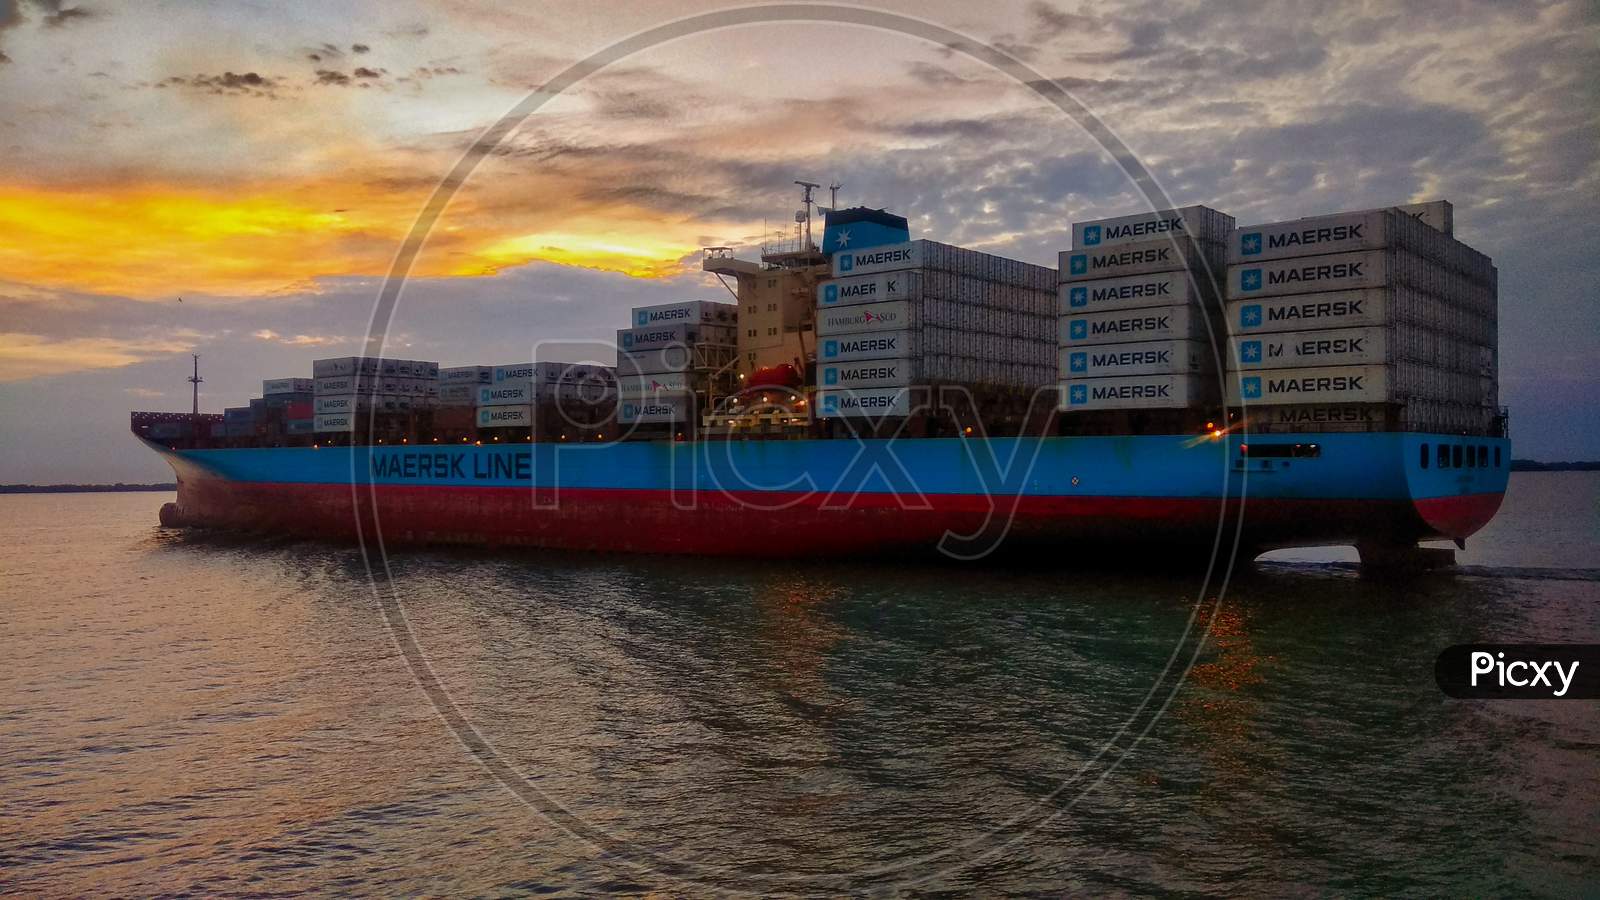 Maersk Line container ship